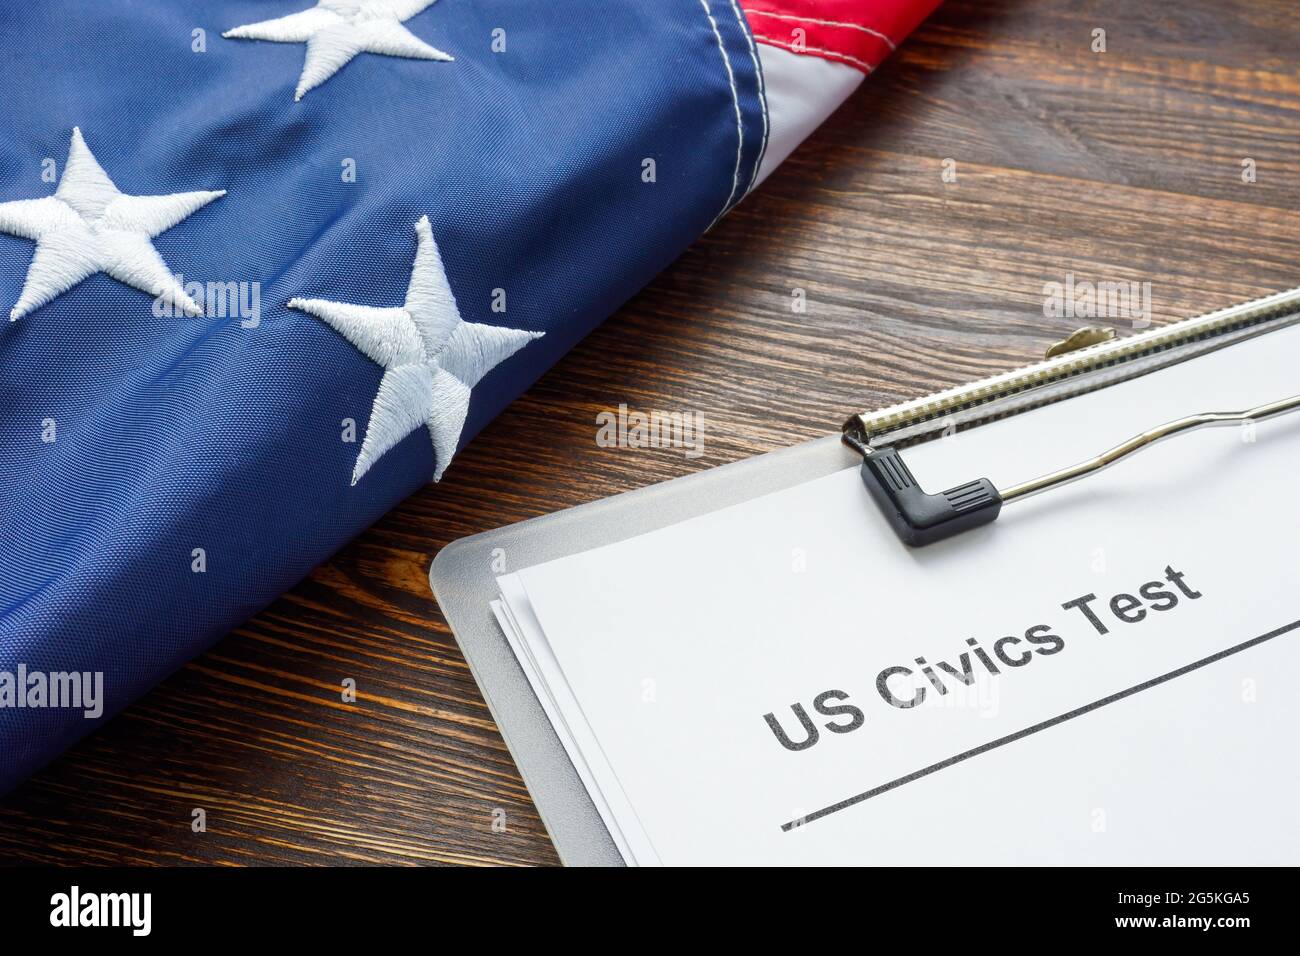 US Civics test for citizenship and USA flag. Stock Photo